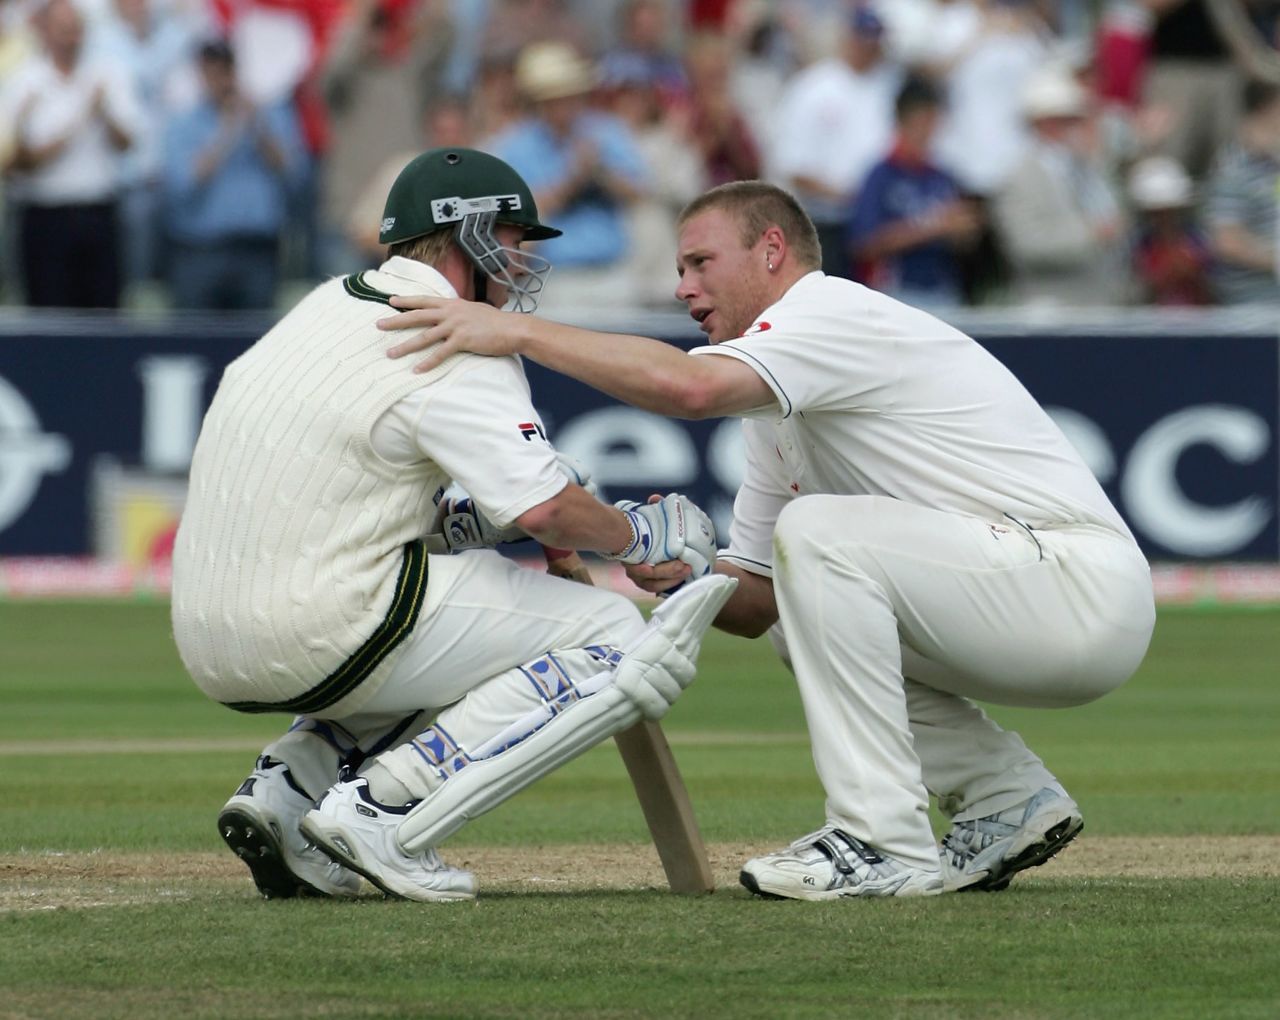 Edgbaston was the location for one of the great Ashes moments when England's Andrew Flintoff consoled Australia's Brett Lee after the home side won the Test by just two runs in 2005.